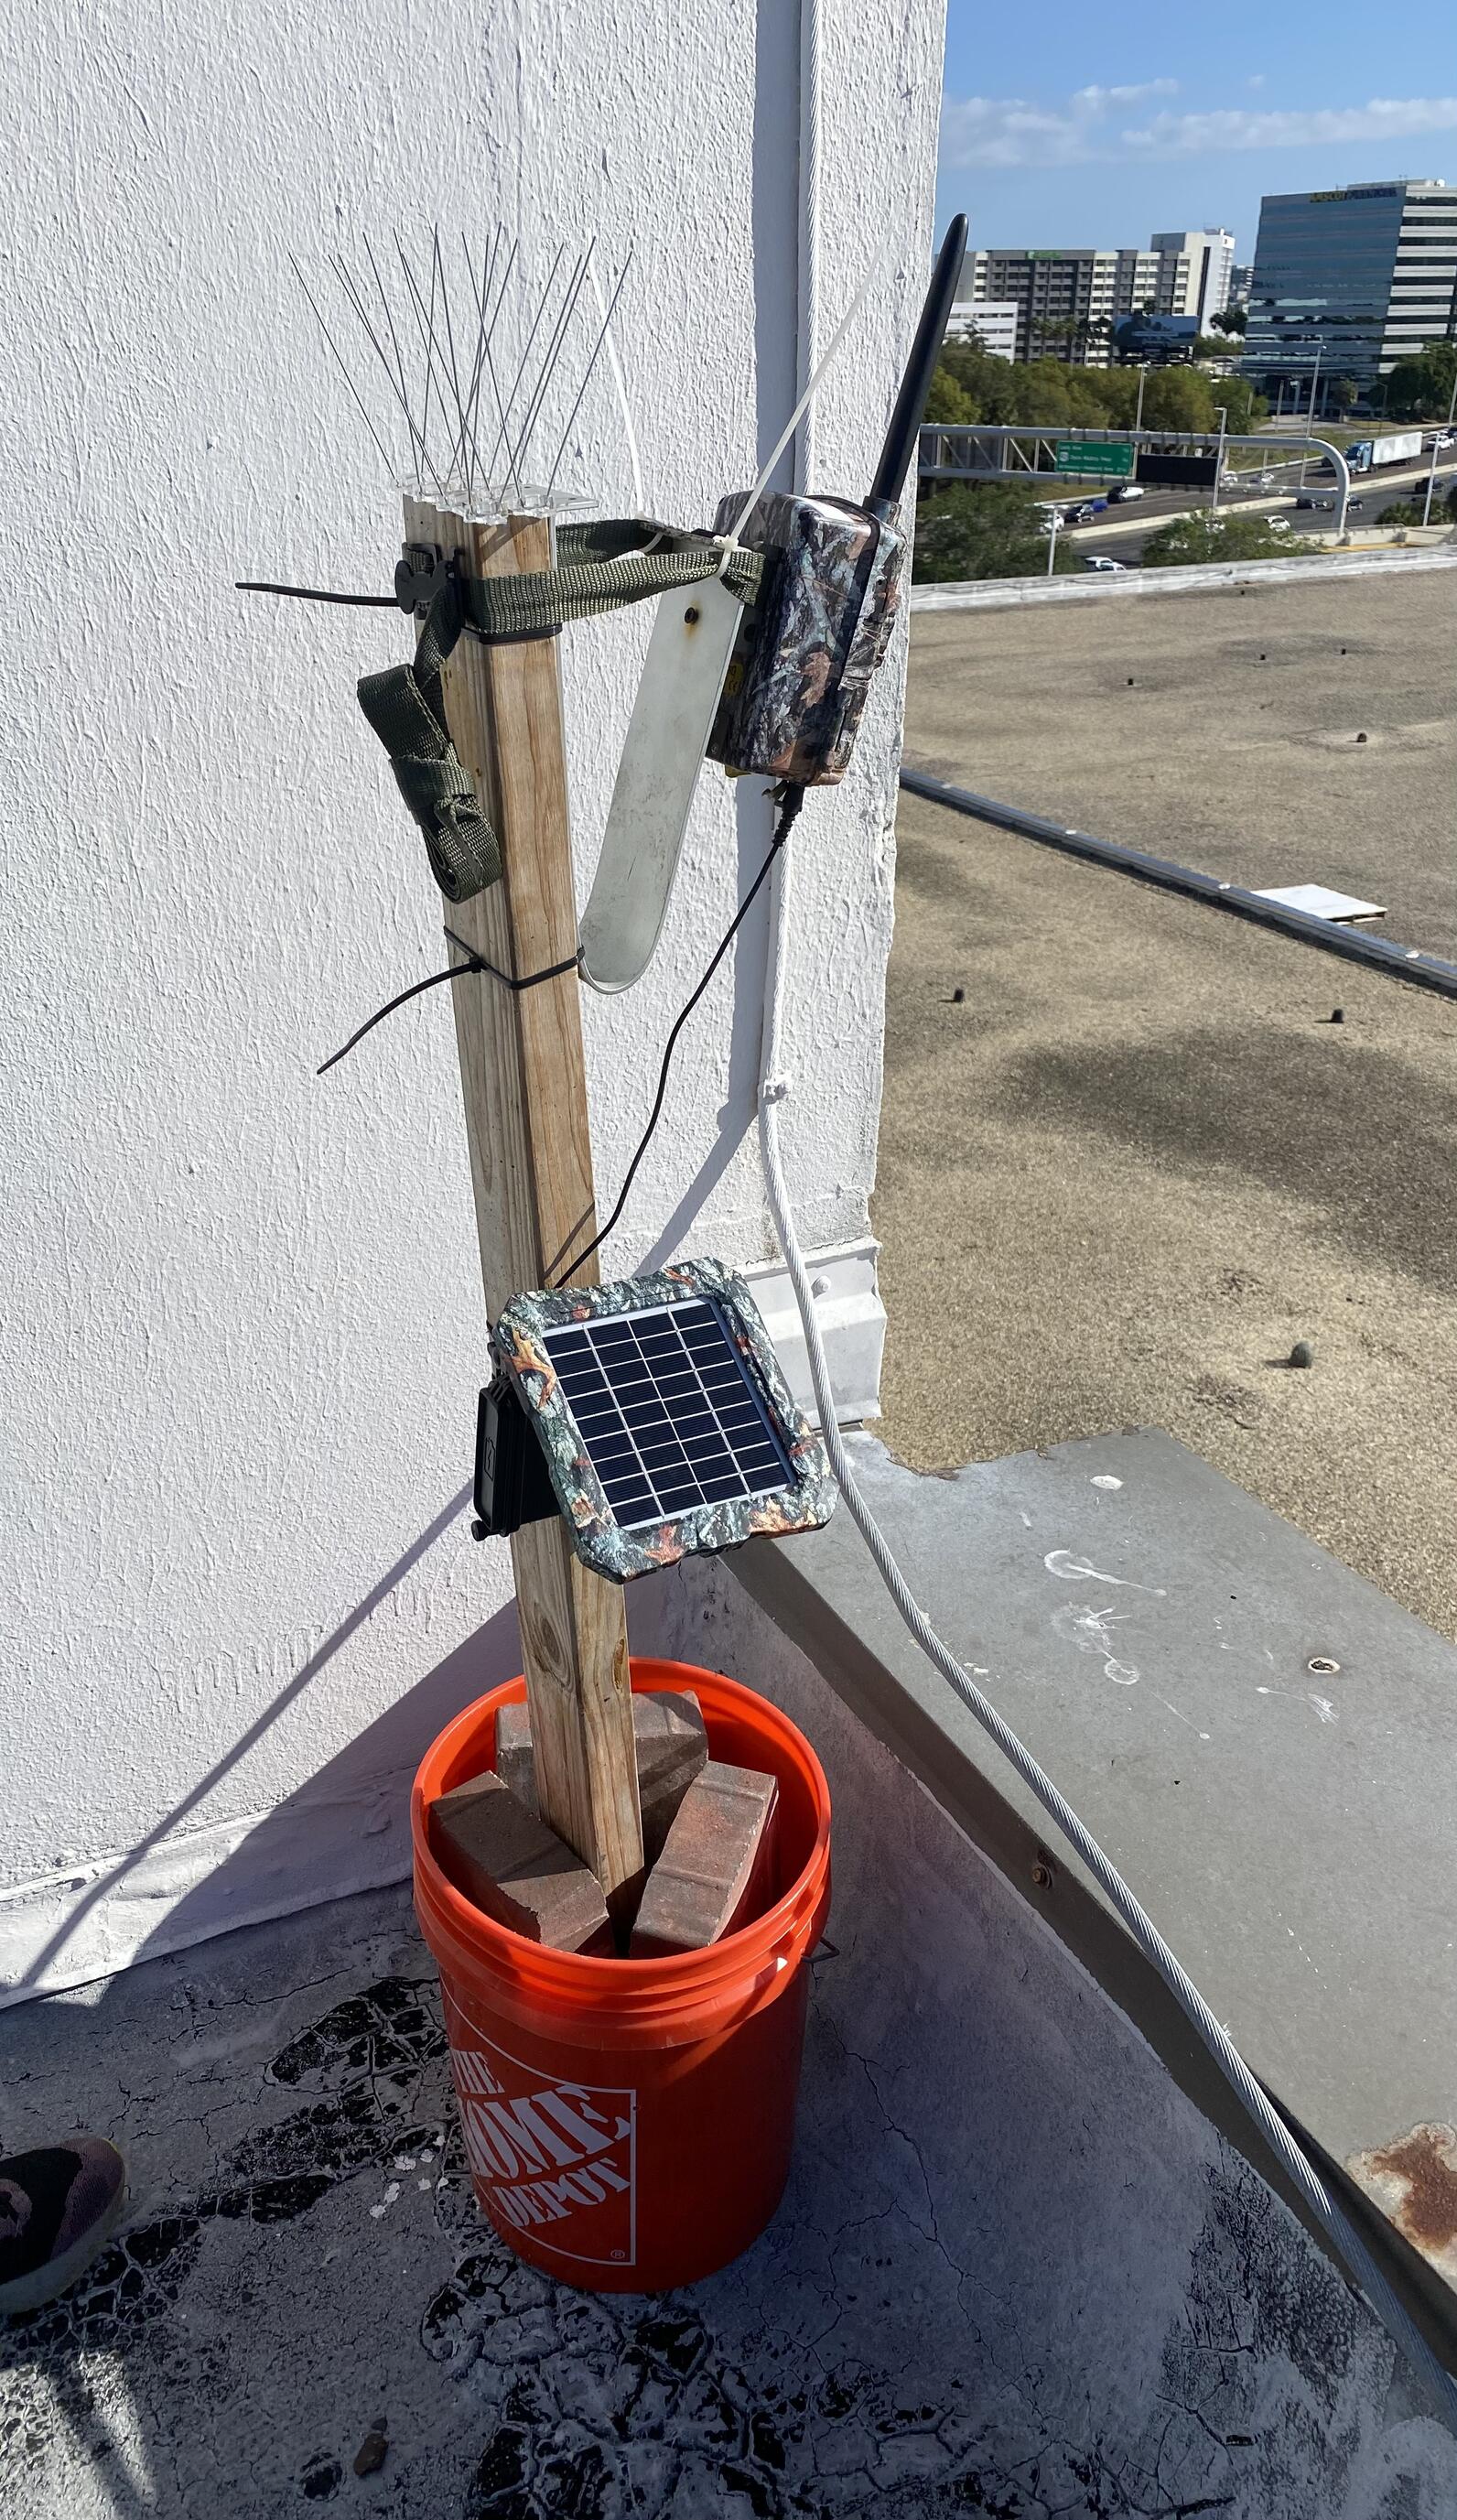 Solar-powered game camera on the roof.